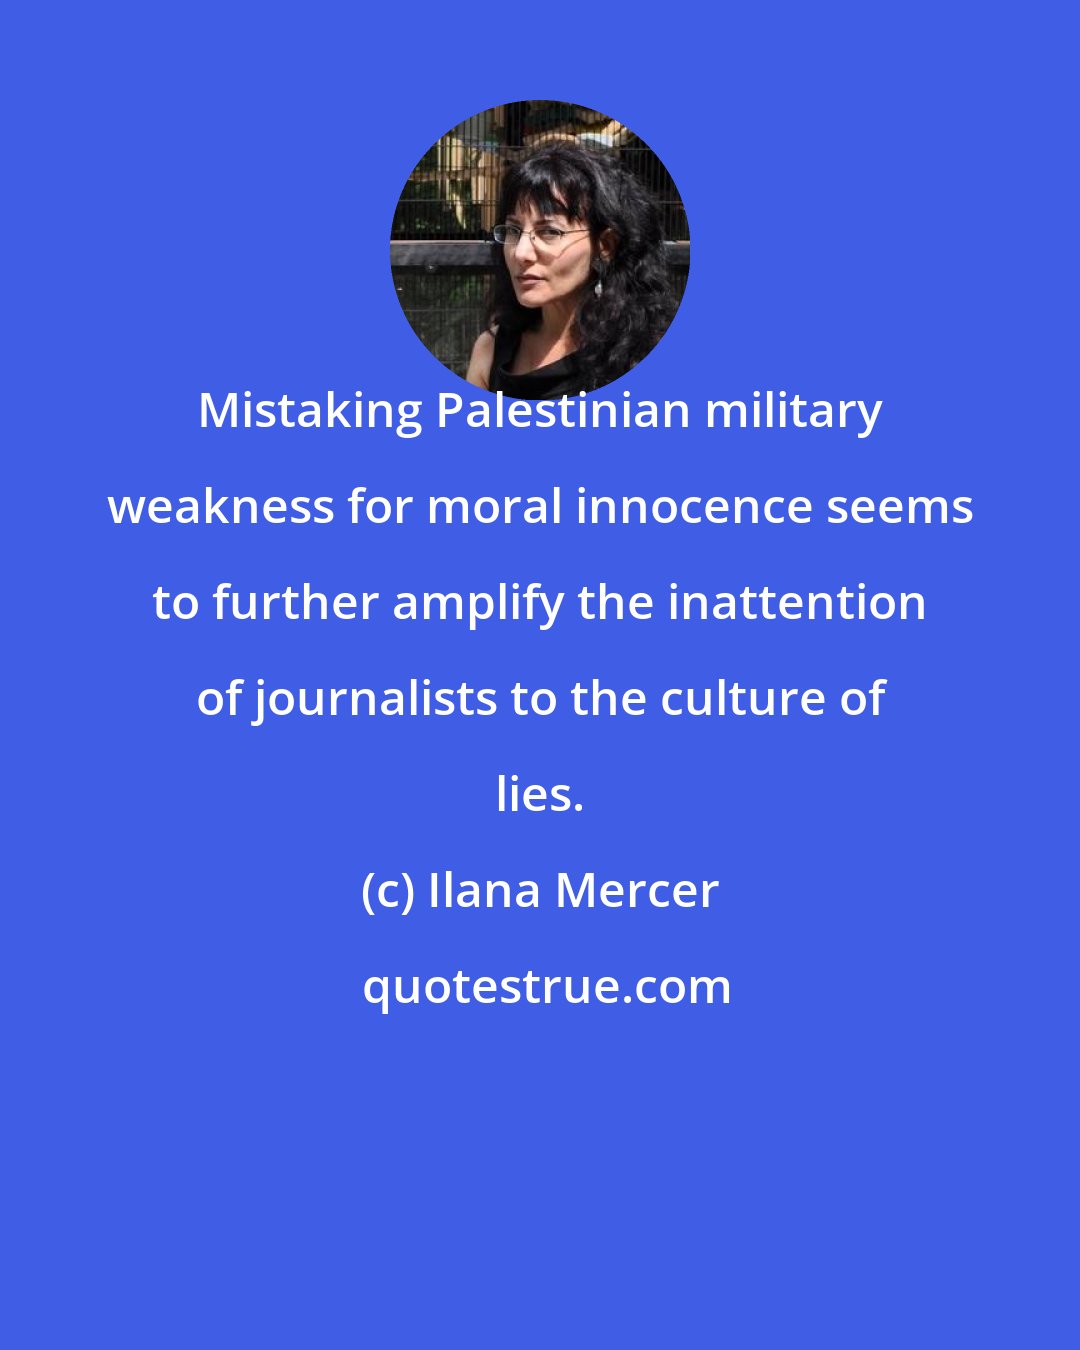 Ilana Mercer: Mistaking Palestinian military weakness for moral innocence seems to further amplify the inattention of journalists to the culture of lies.